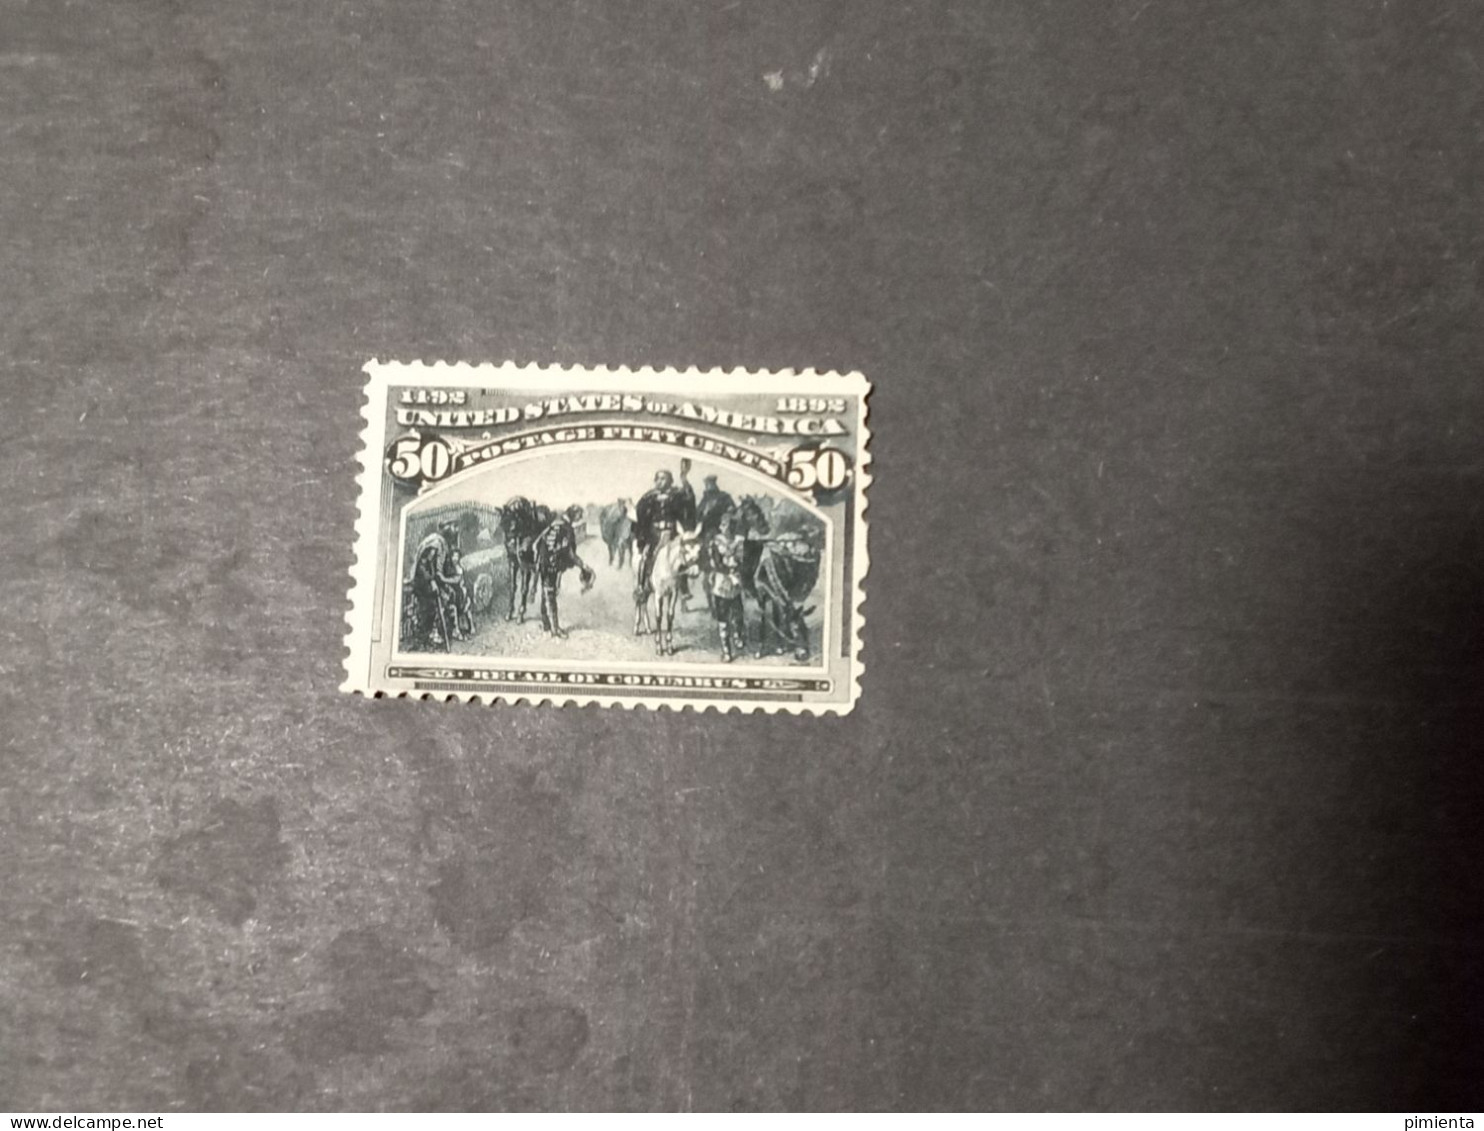 Timbre Exposition Colombienne De 1893, Neuf, 50 Cents - Unused Stamps